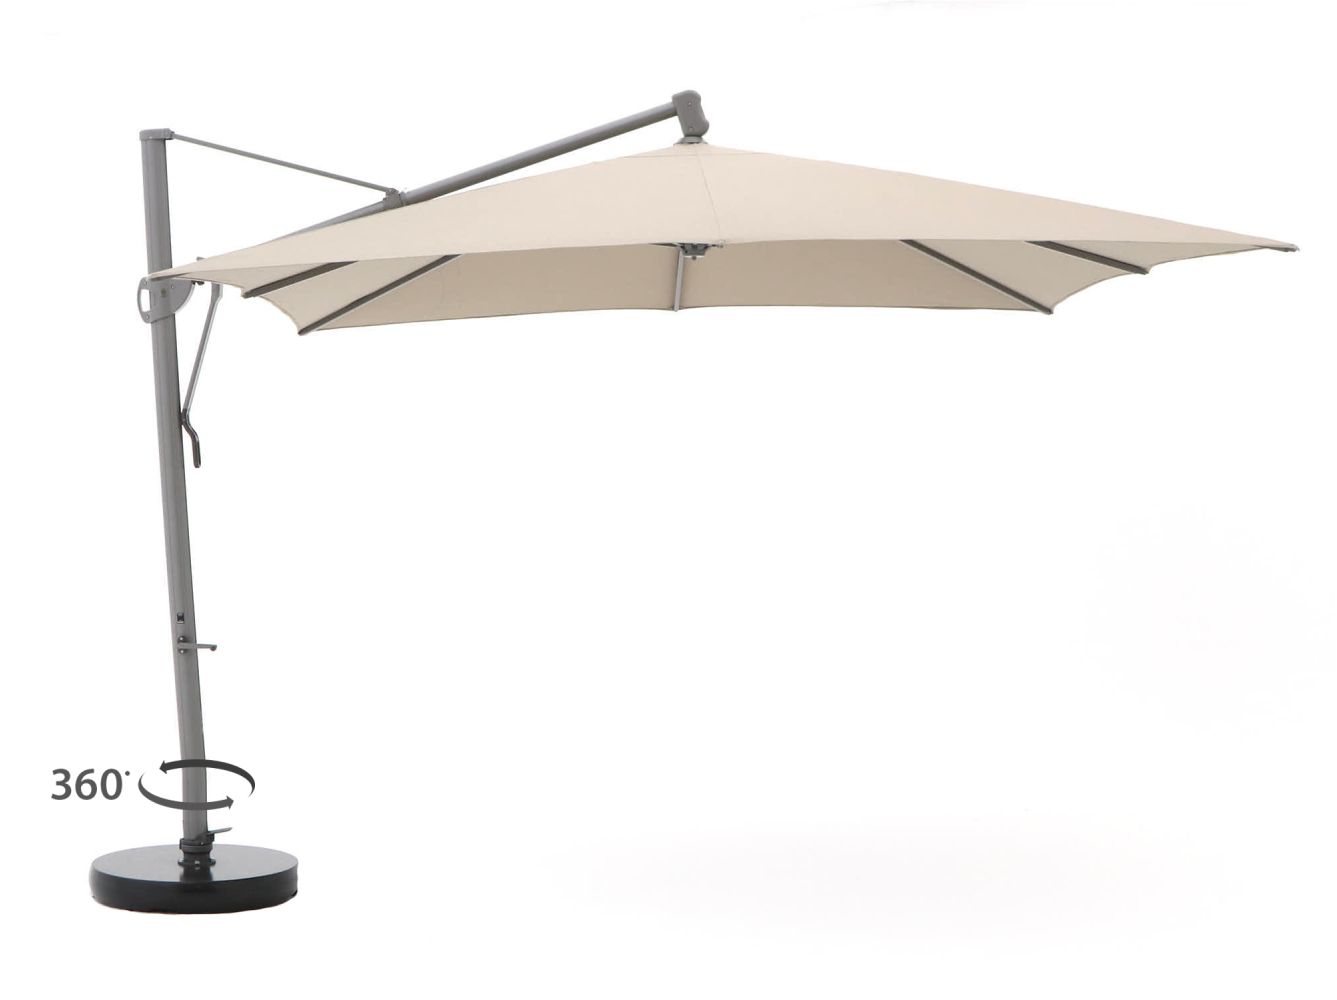 Glatz Sombrano Easy zweefparasol 350x350cm - Taupe (incl. voet 140 kg) (incl.hoes) - Kees